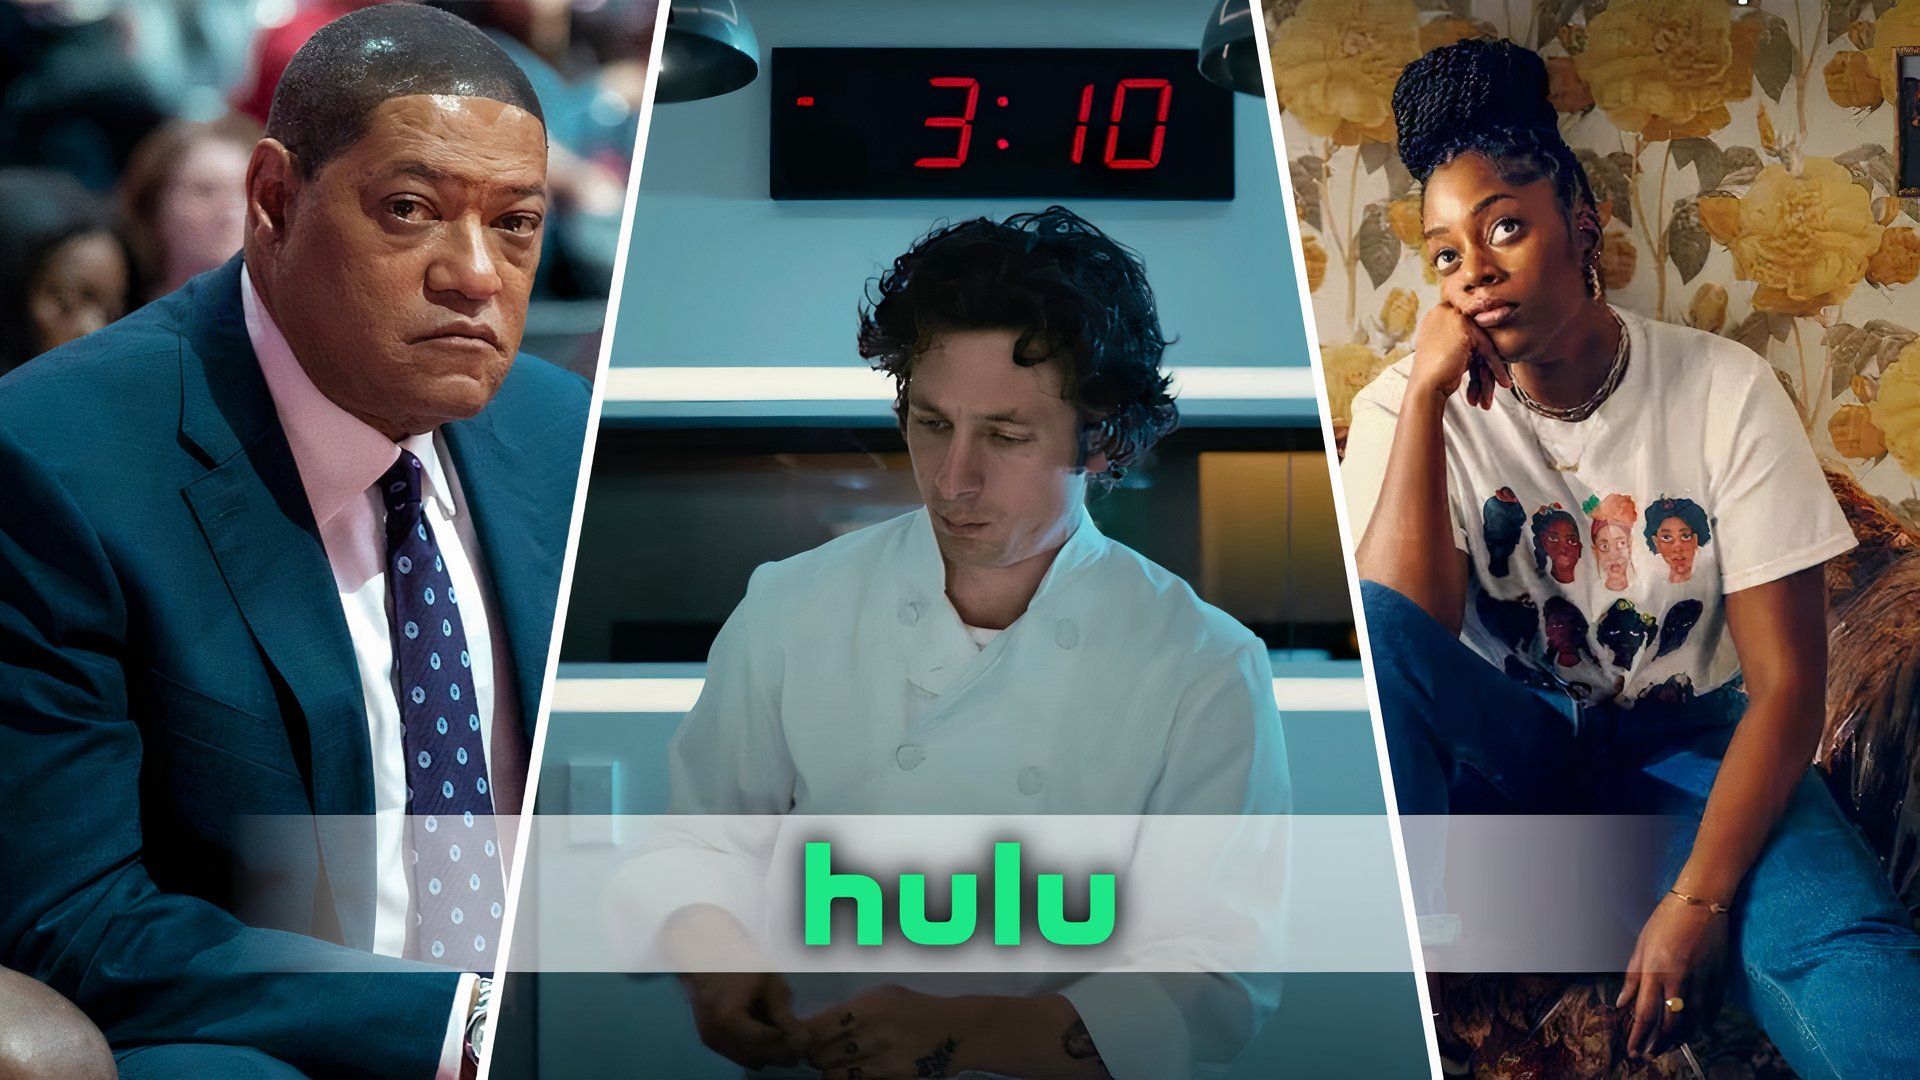 An edited image of three TV shows with the Hulu logo in the center including Clipped, The Bear, and Queenie